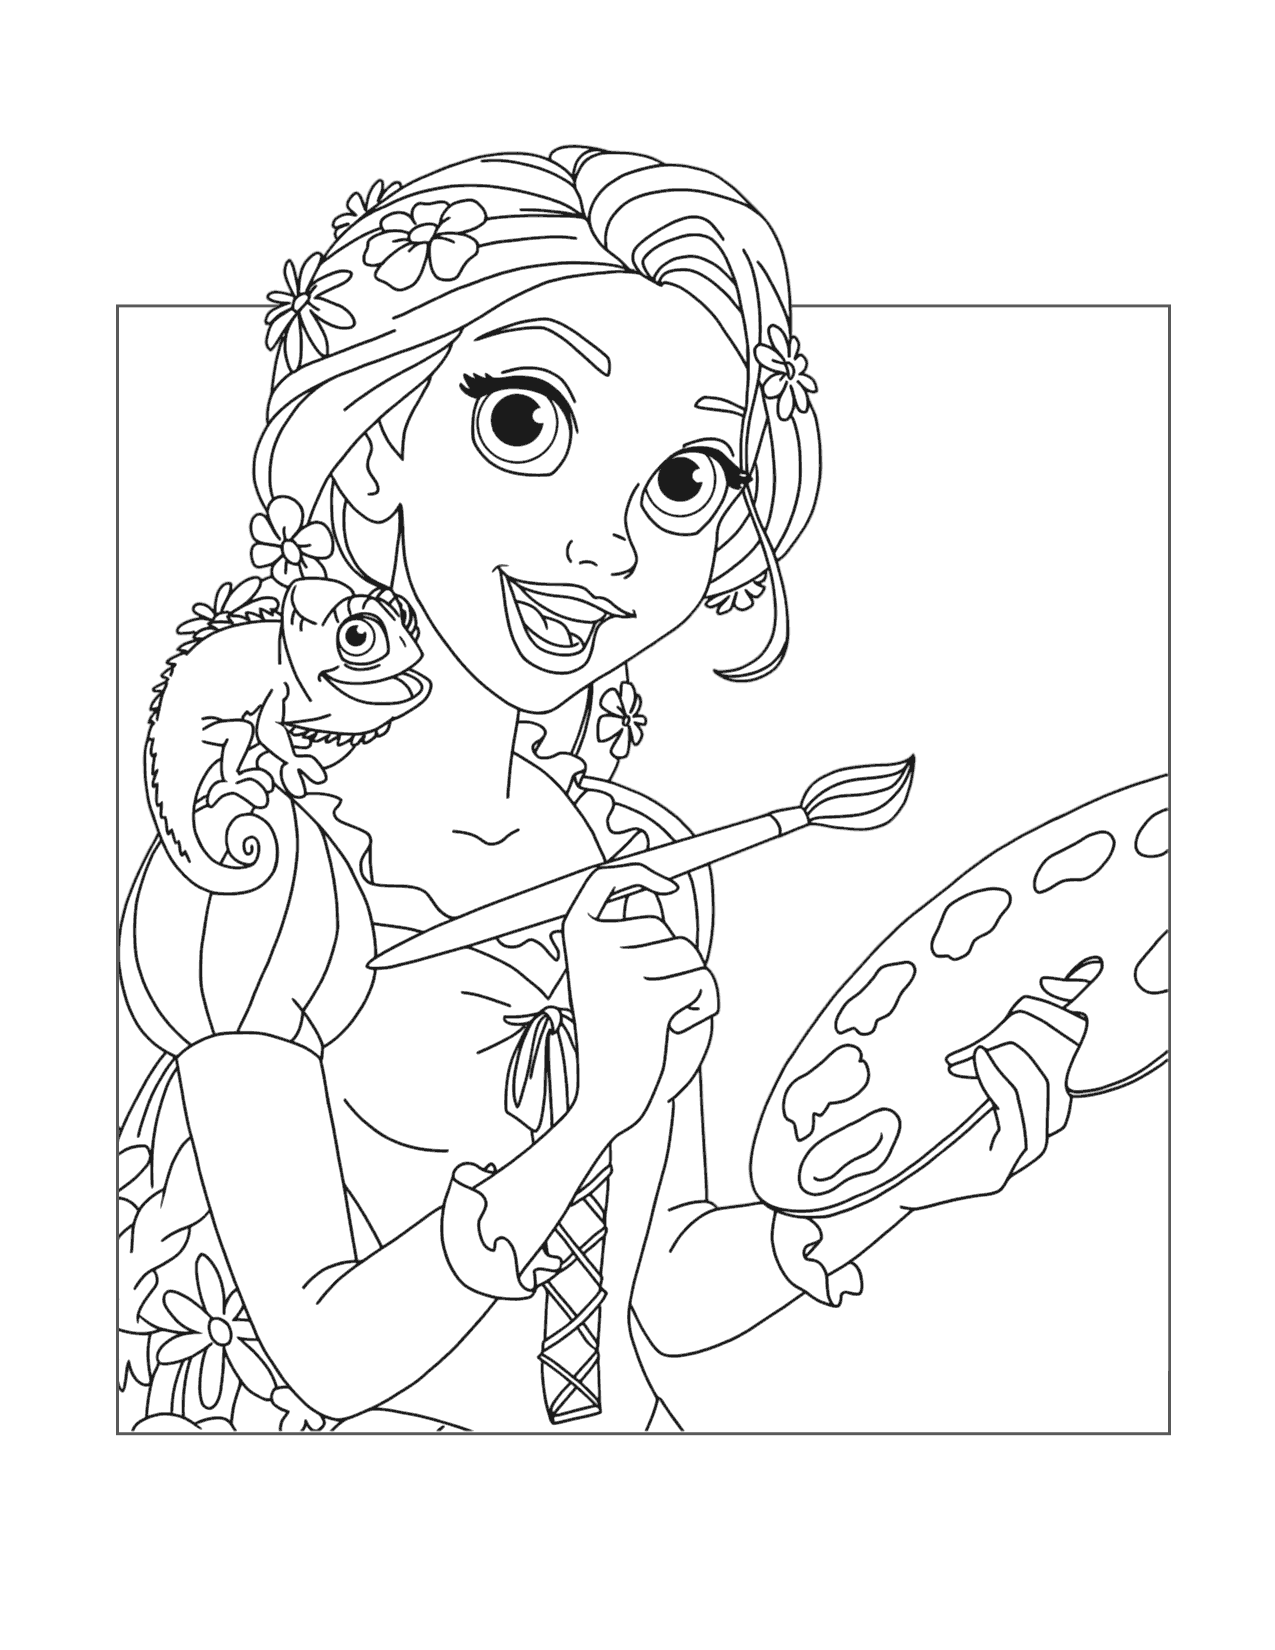 Rapunzel Likes To Paint Tangled Coloring Page